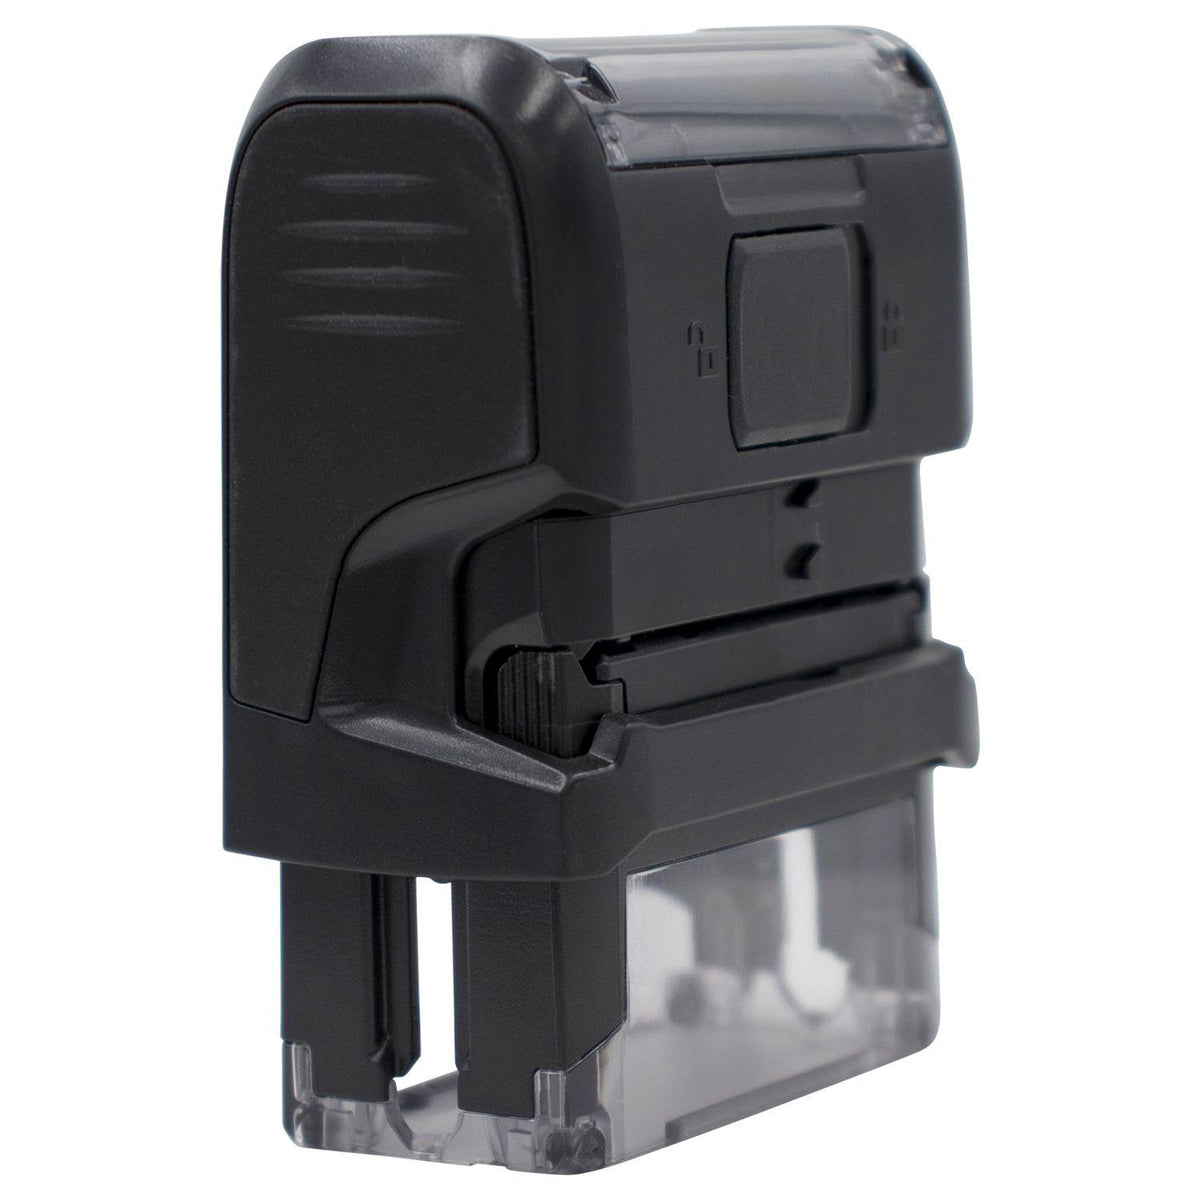 Self-Inking Banco Stamp - Engineer Seal Stamps - Brand_Trodat, Impression Size_Small, Stamp Type_Self-Inking Stamp, Type of Use_Accounting, Type of Use_Finance